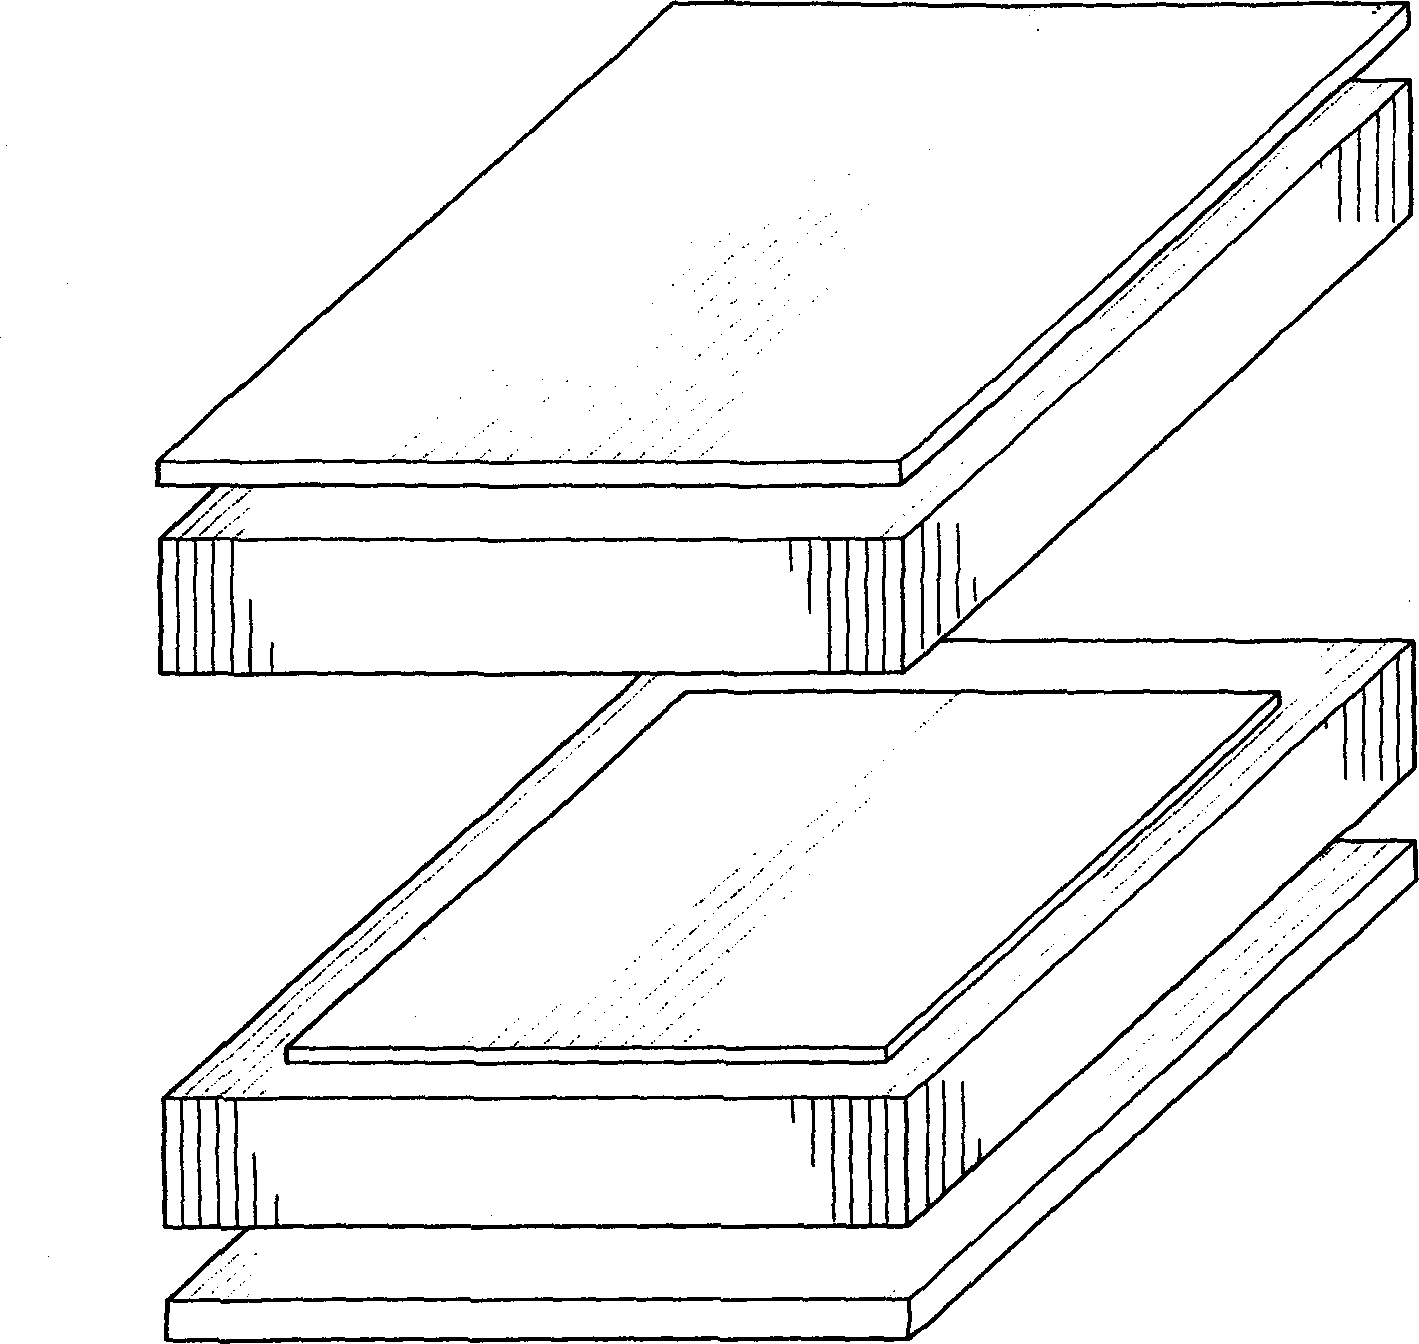 Modular structural supporter containing damping filling materials